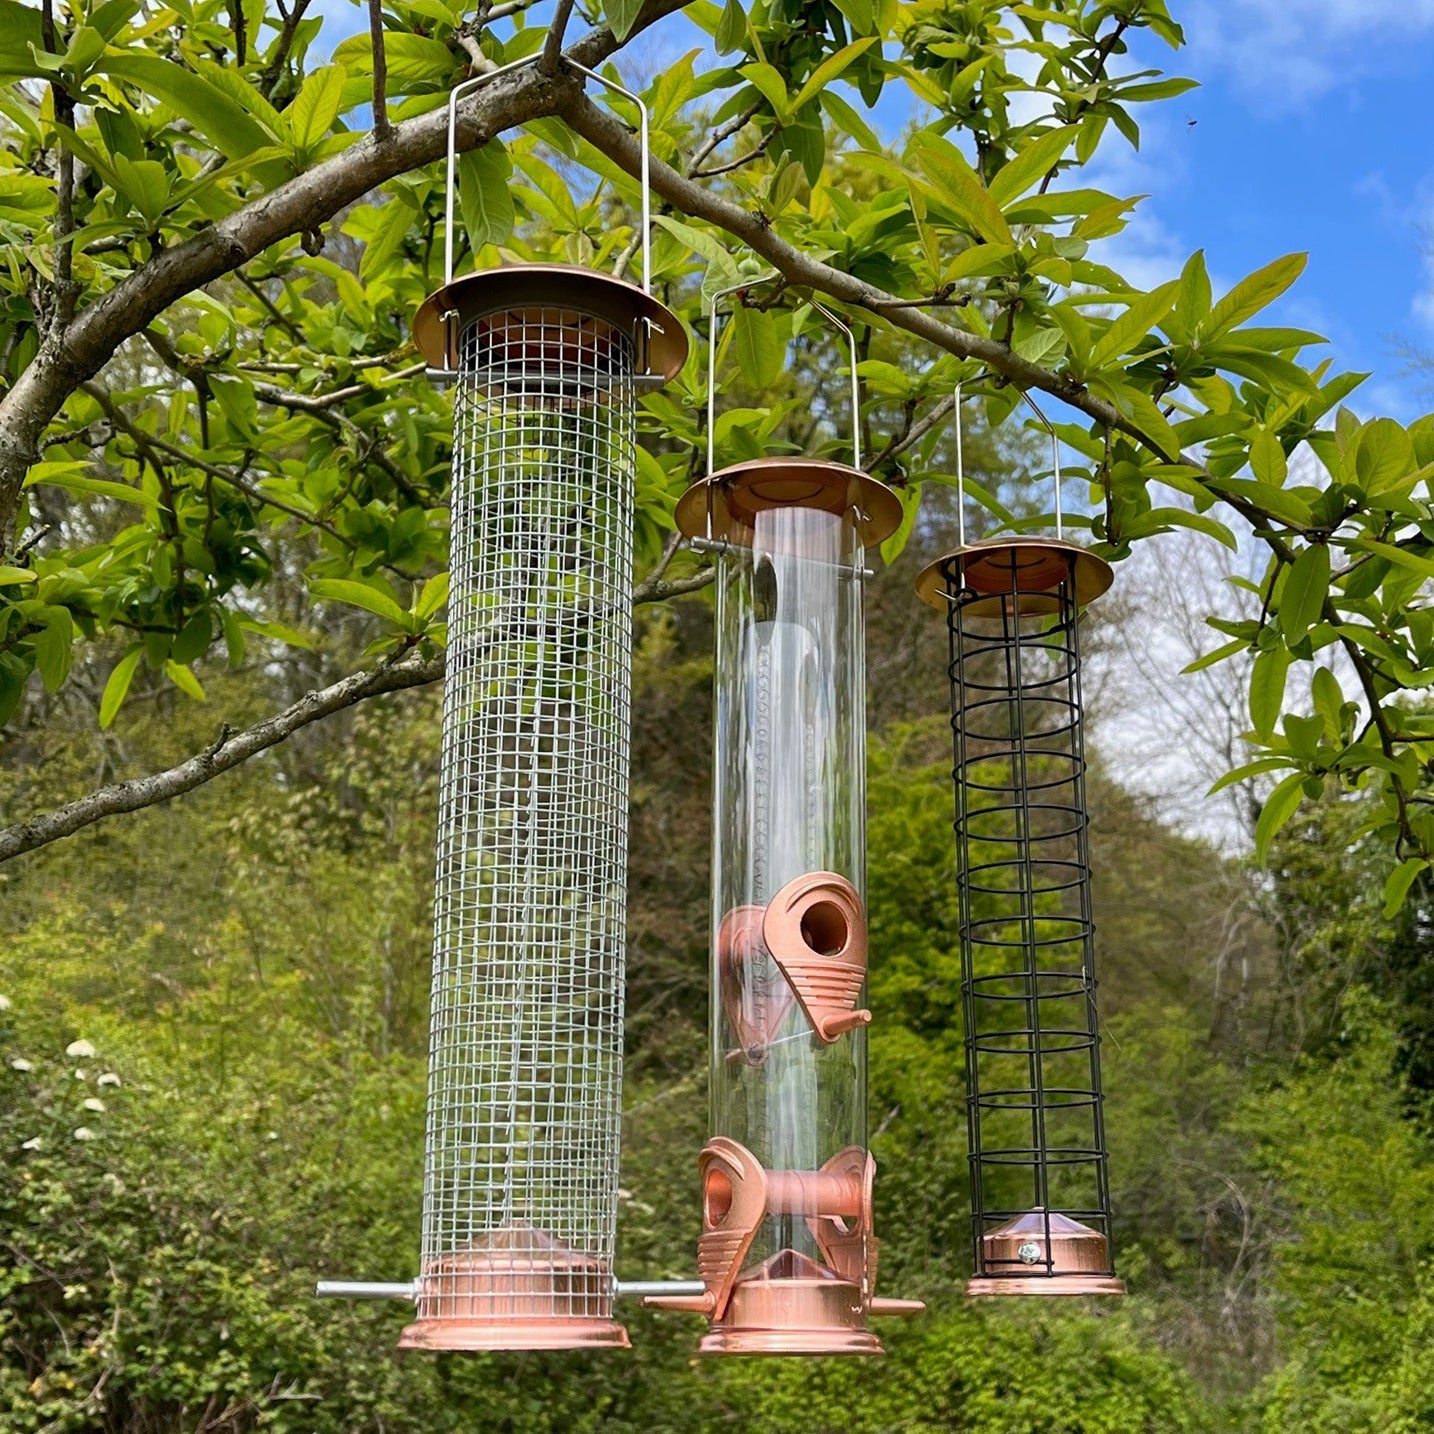 The Crichel Set of Bird Feeders Seed, Nut and Fatball (Set of 6)